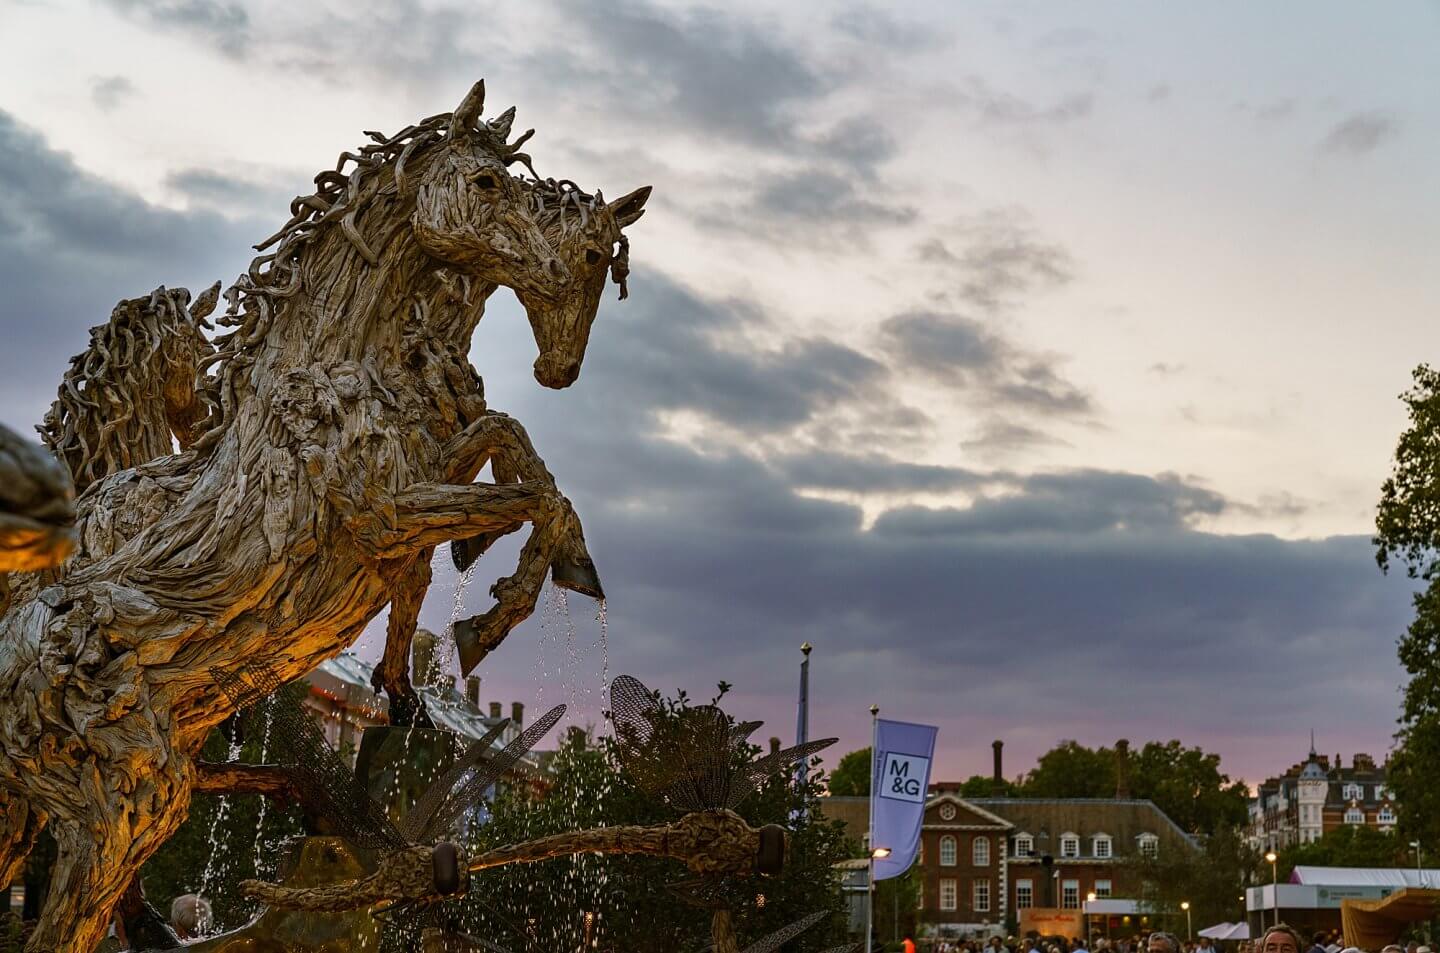 evening falls on autumn Chelsea Flower Show with timber horse sculpture